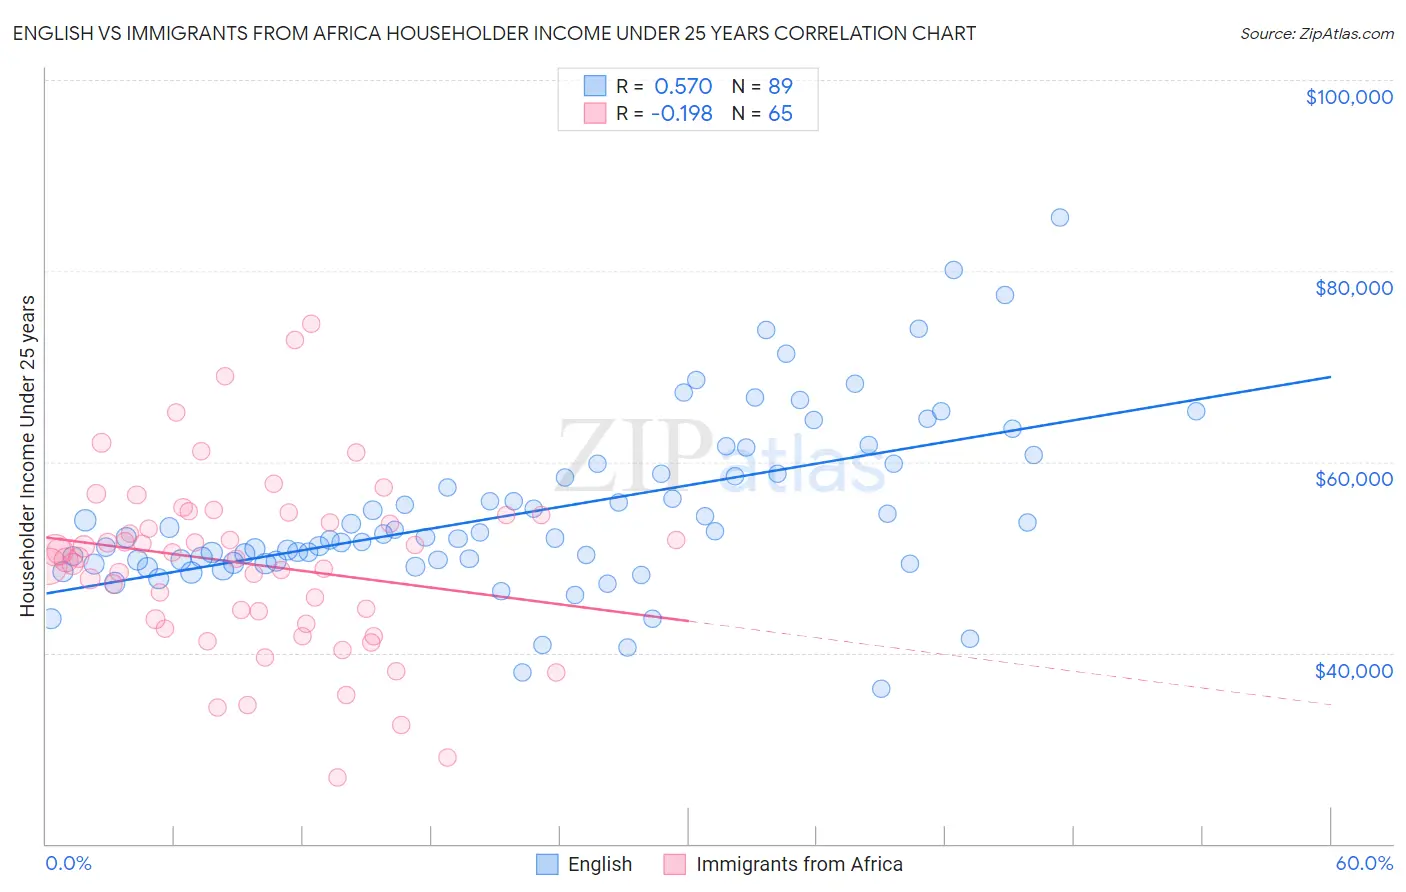 English vs Immigrants from Africa Householder Income Under 25 years